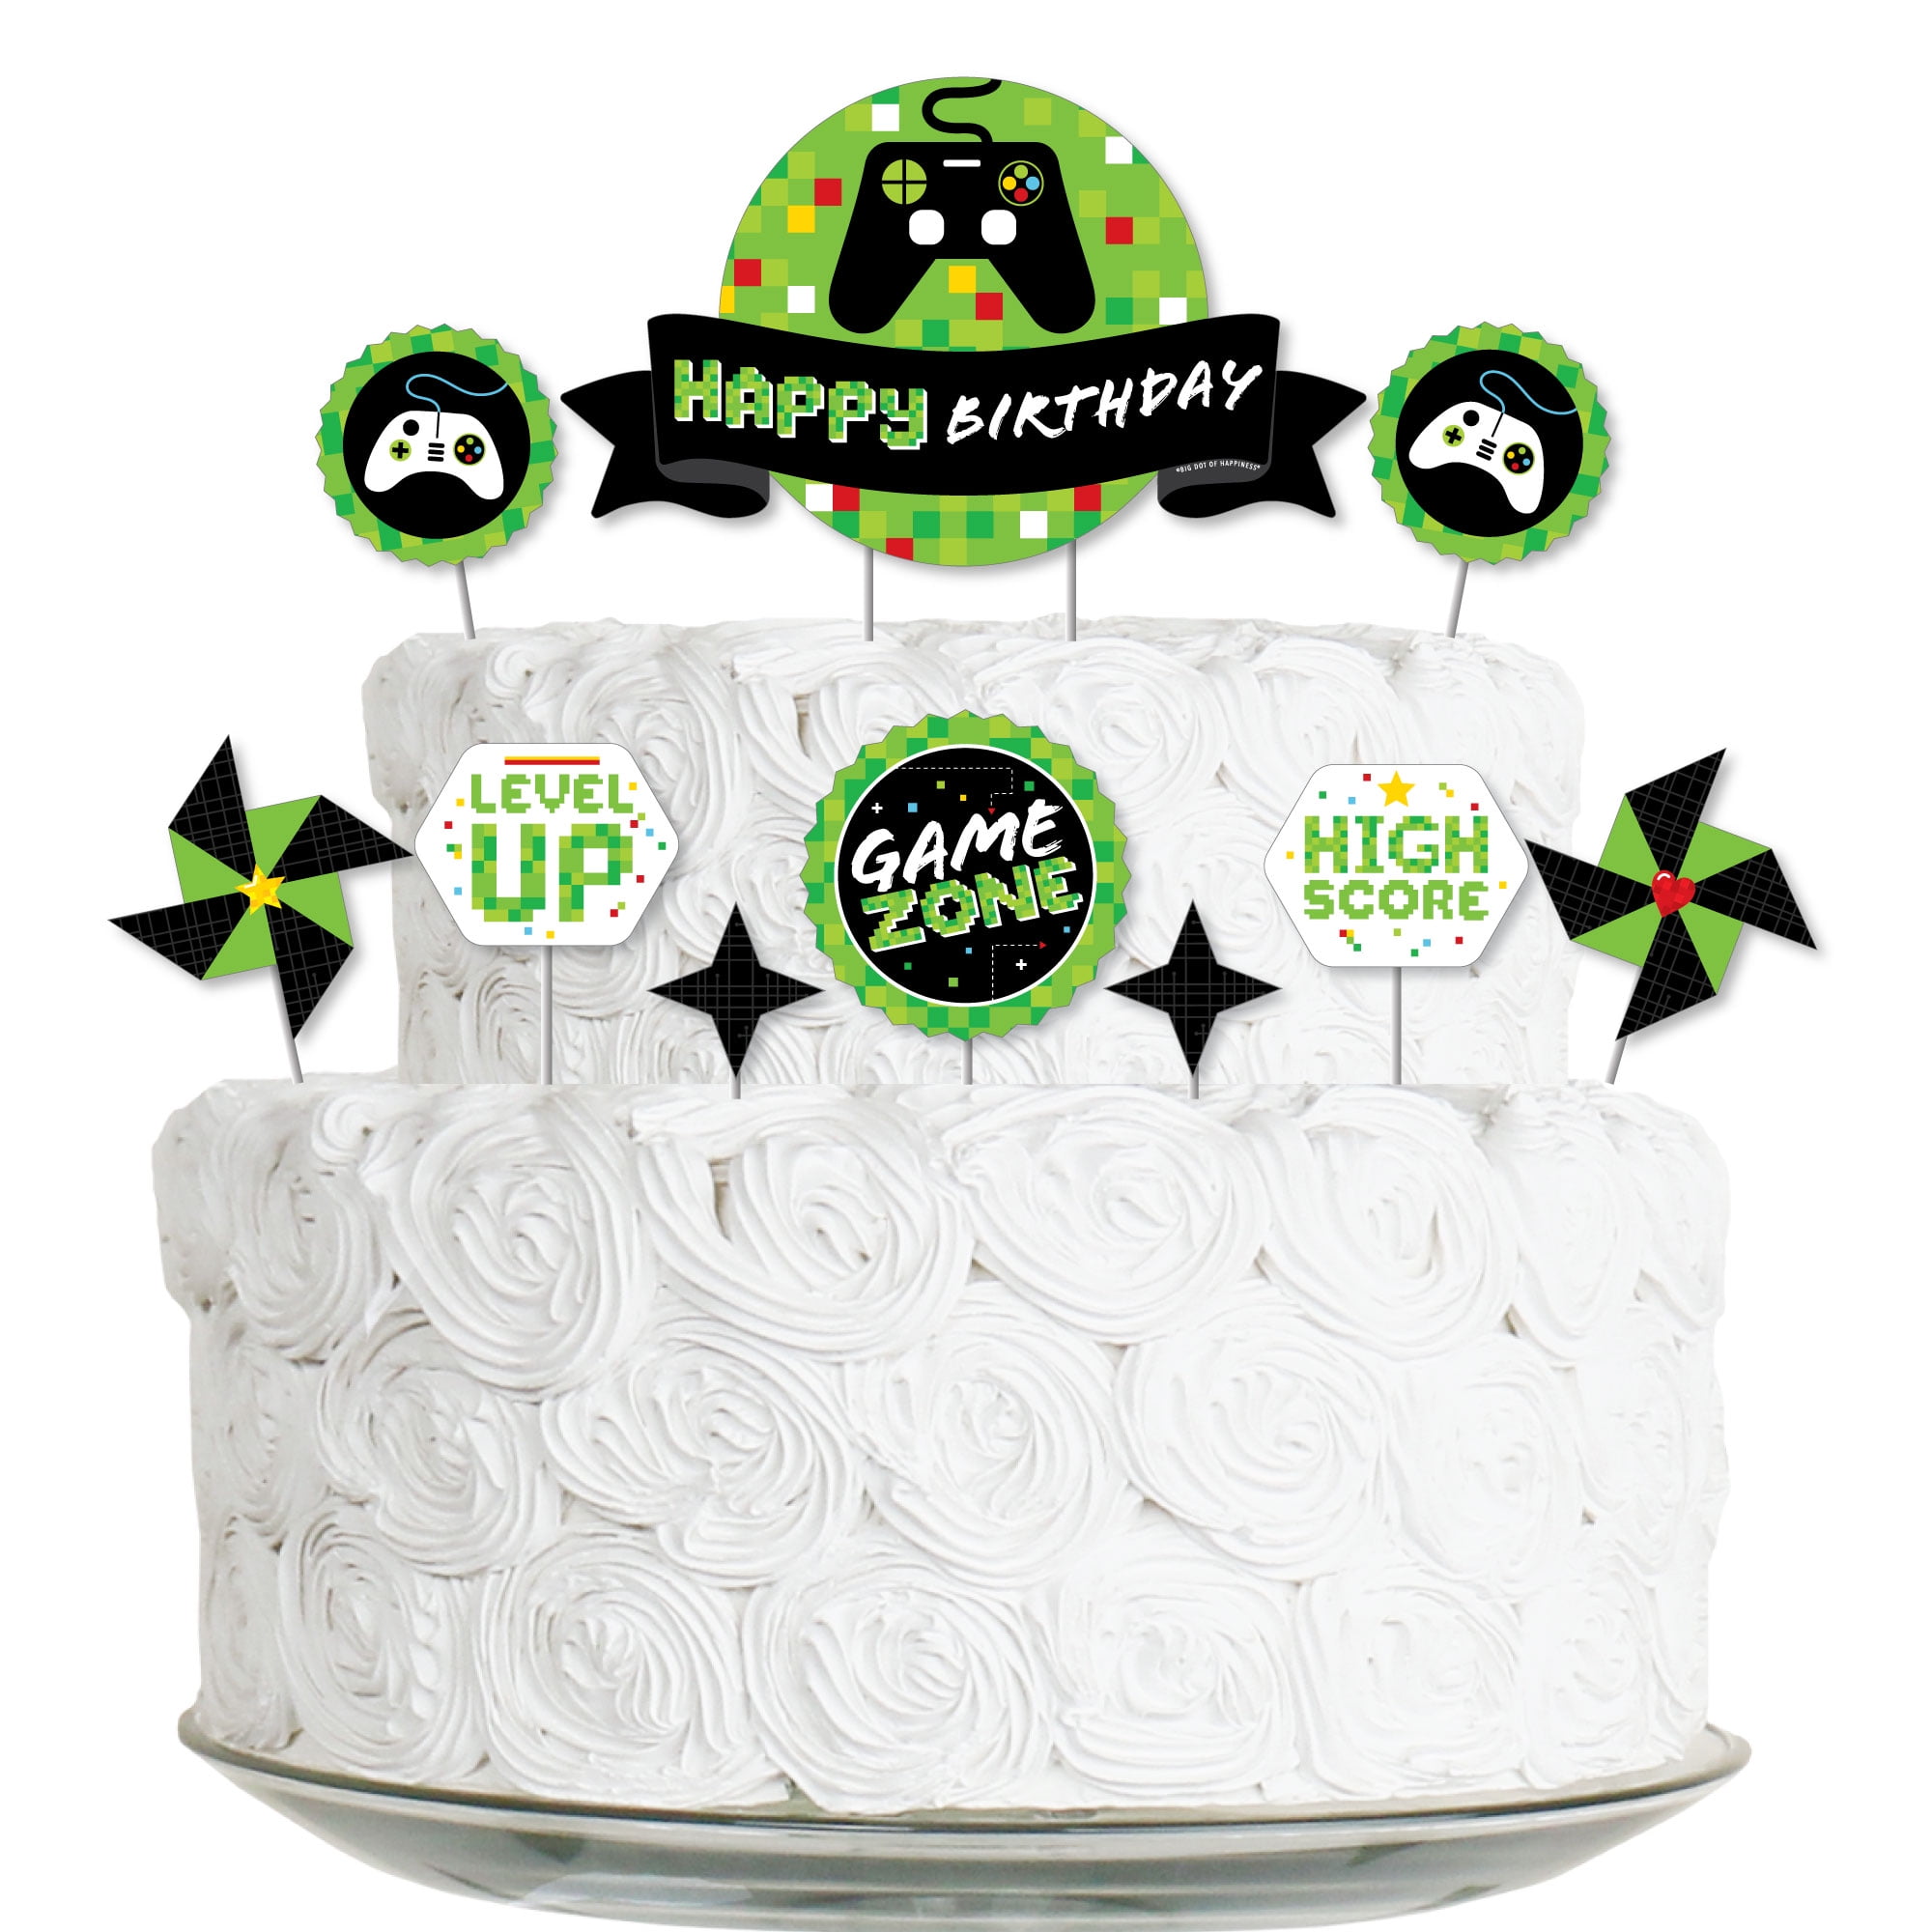 Topper gâteau Happy Birthday, couleur or, 22 styles, décorations